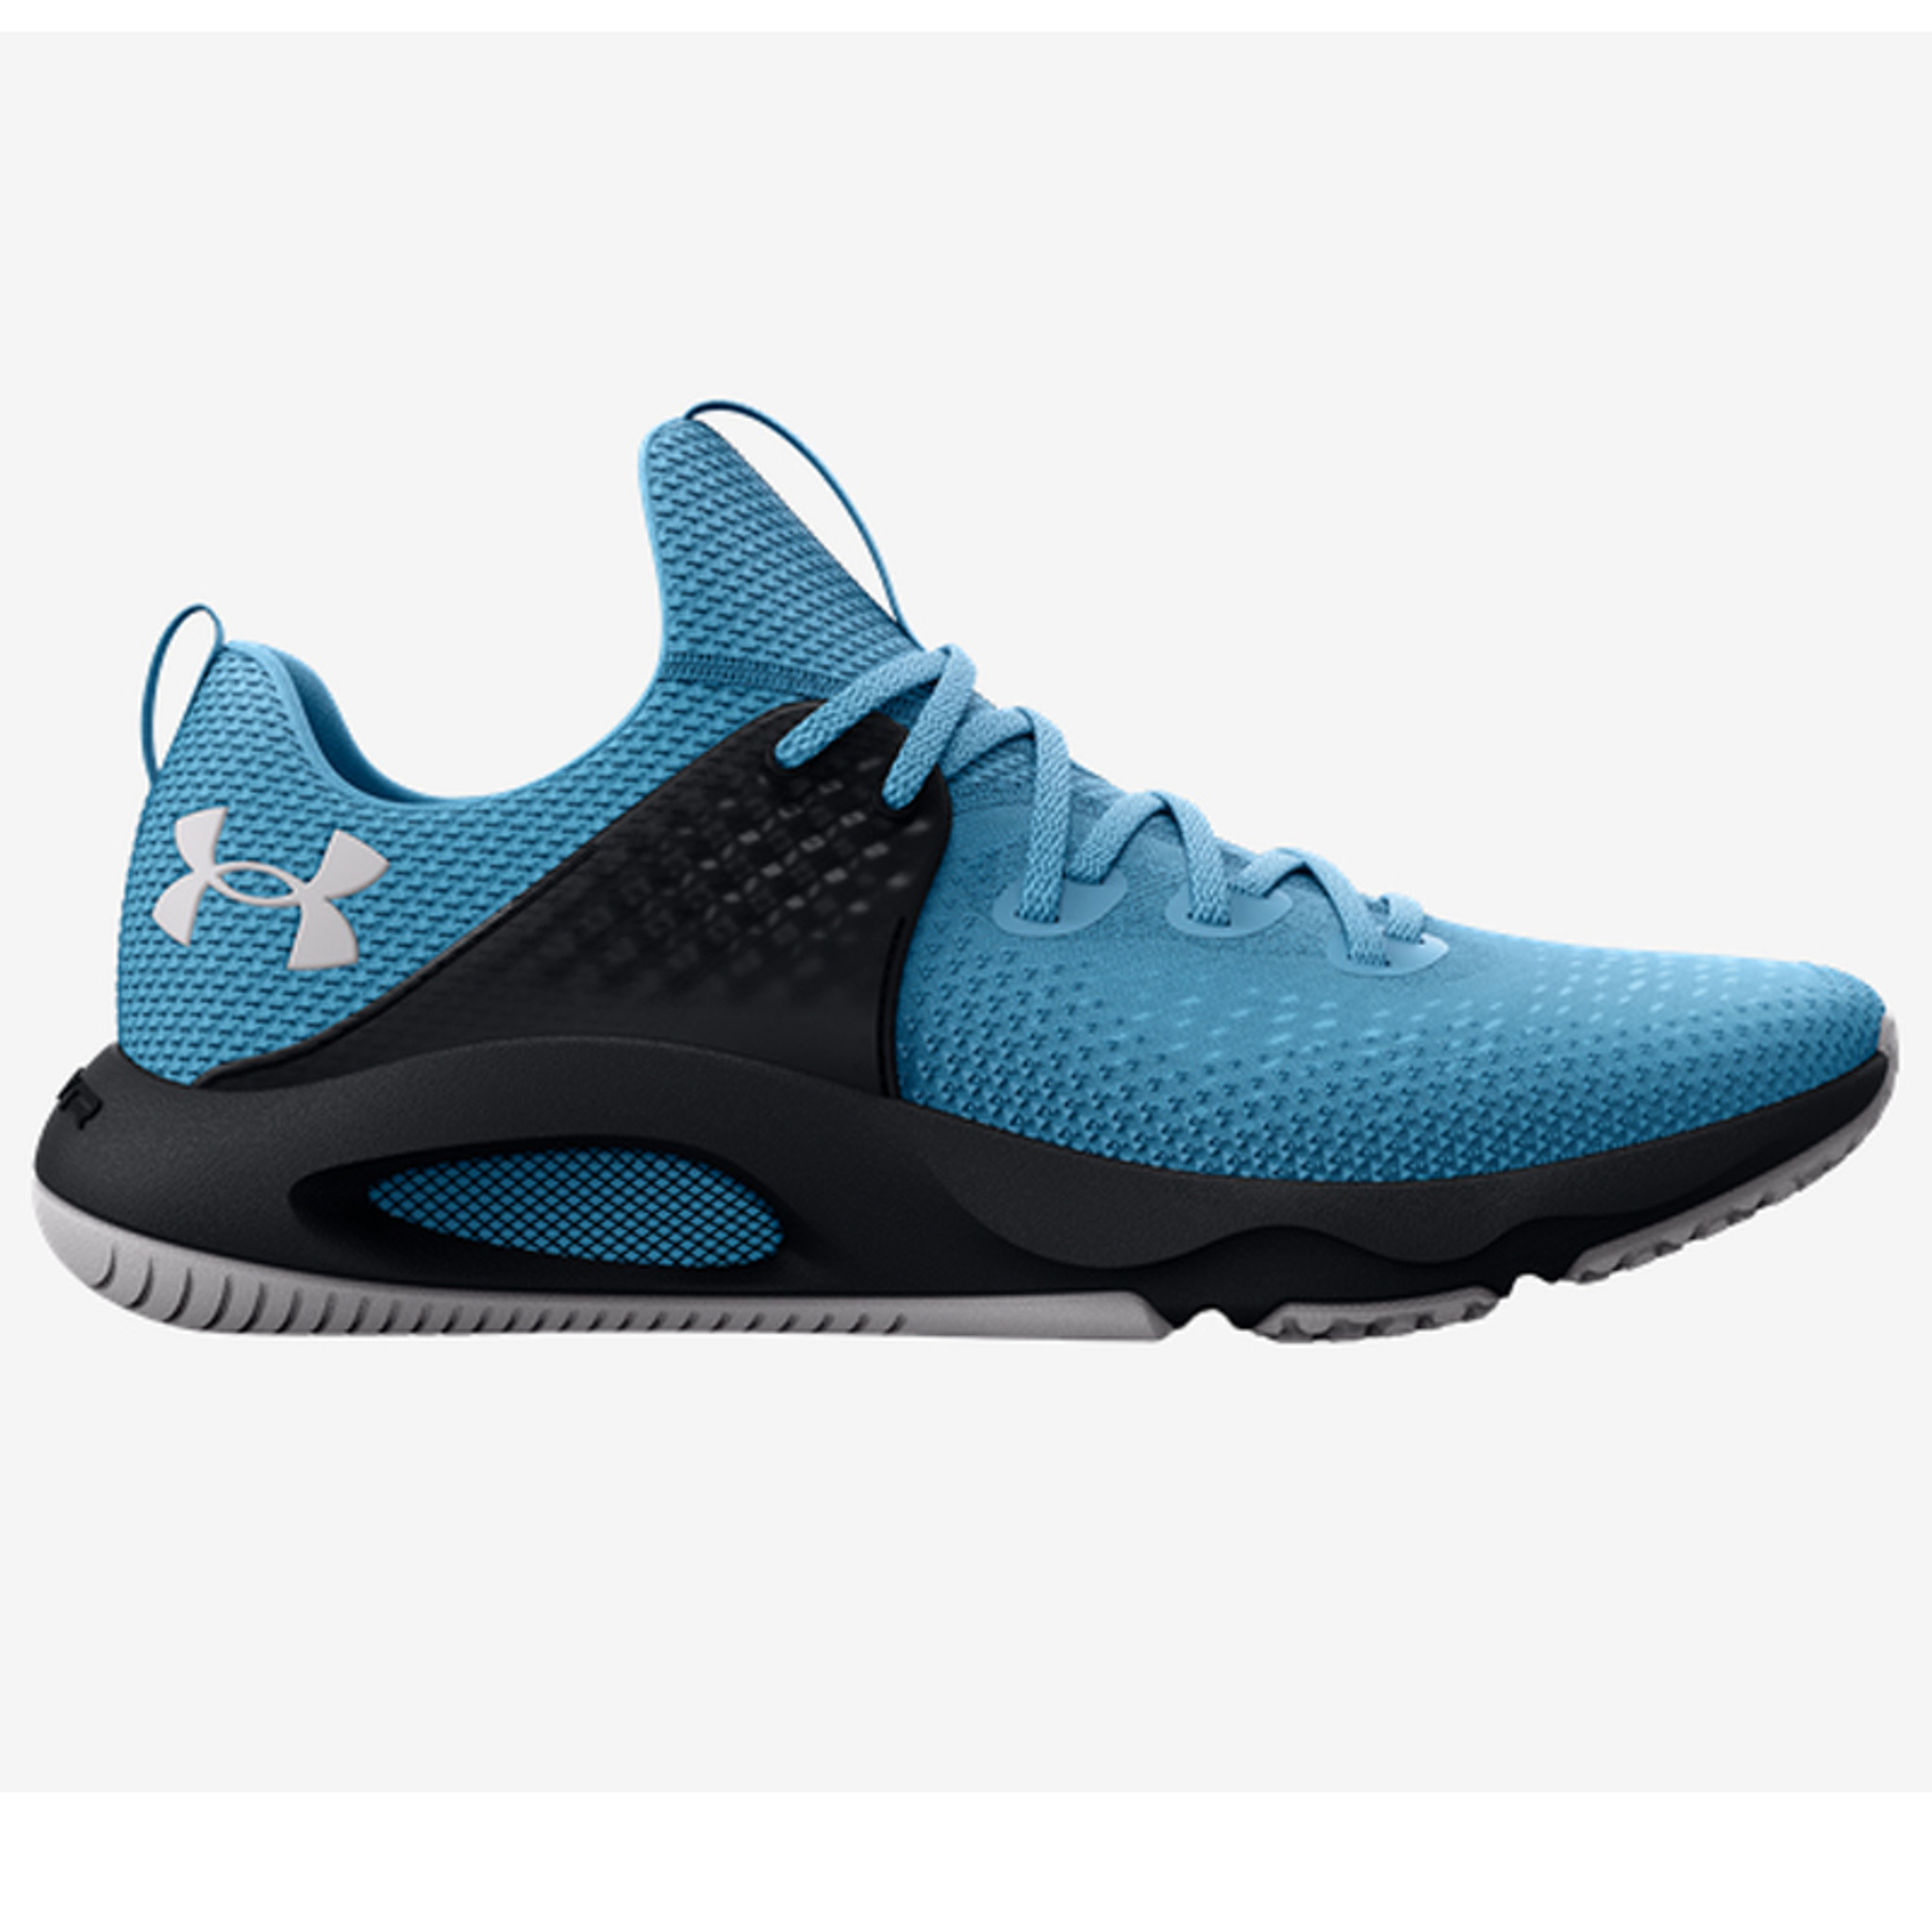 Under Armour Hovr Rise 3 Shoes - 3024273-402 Blue - KM Sports